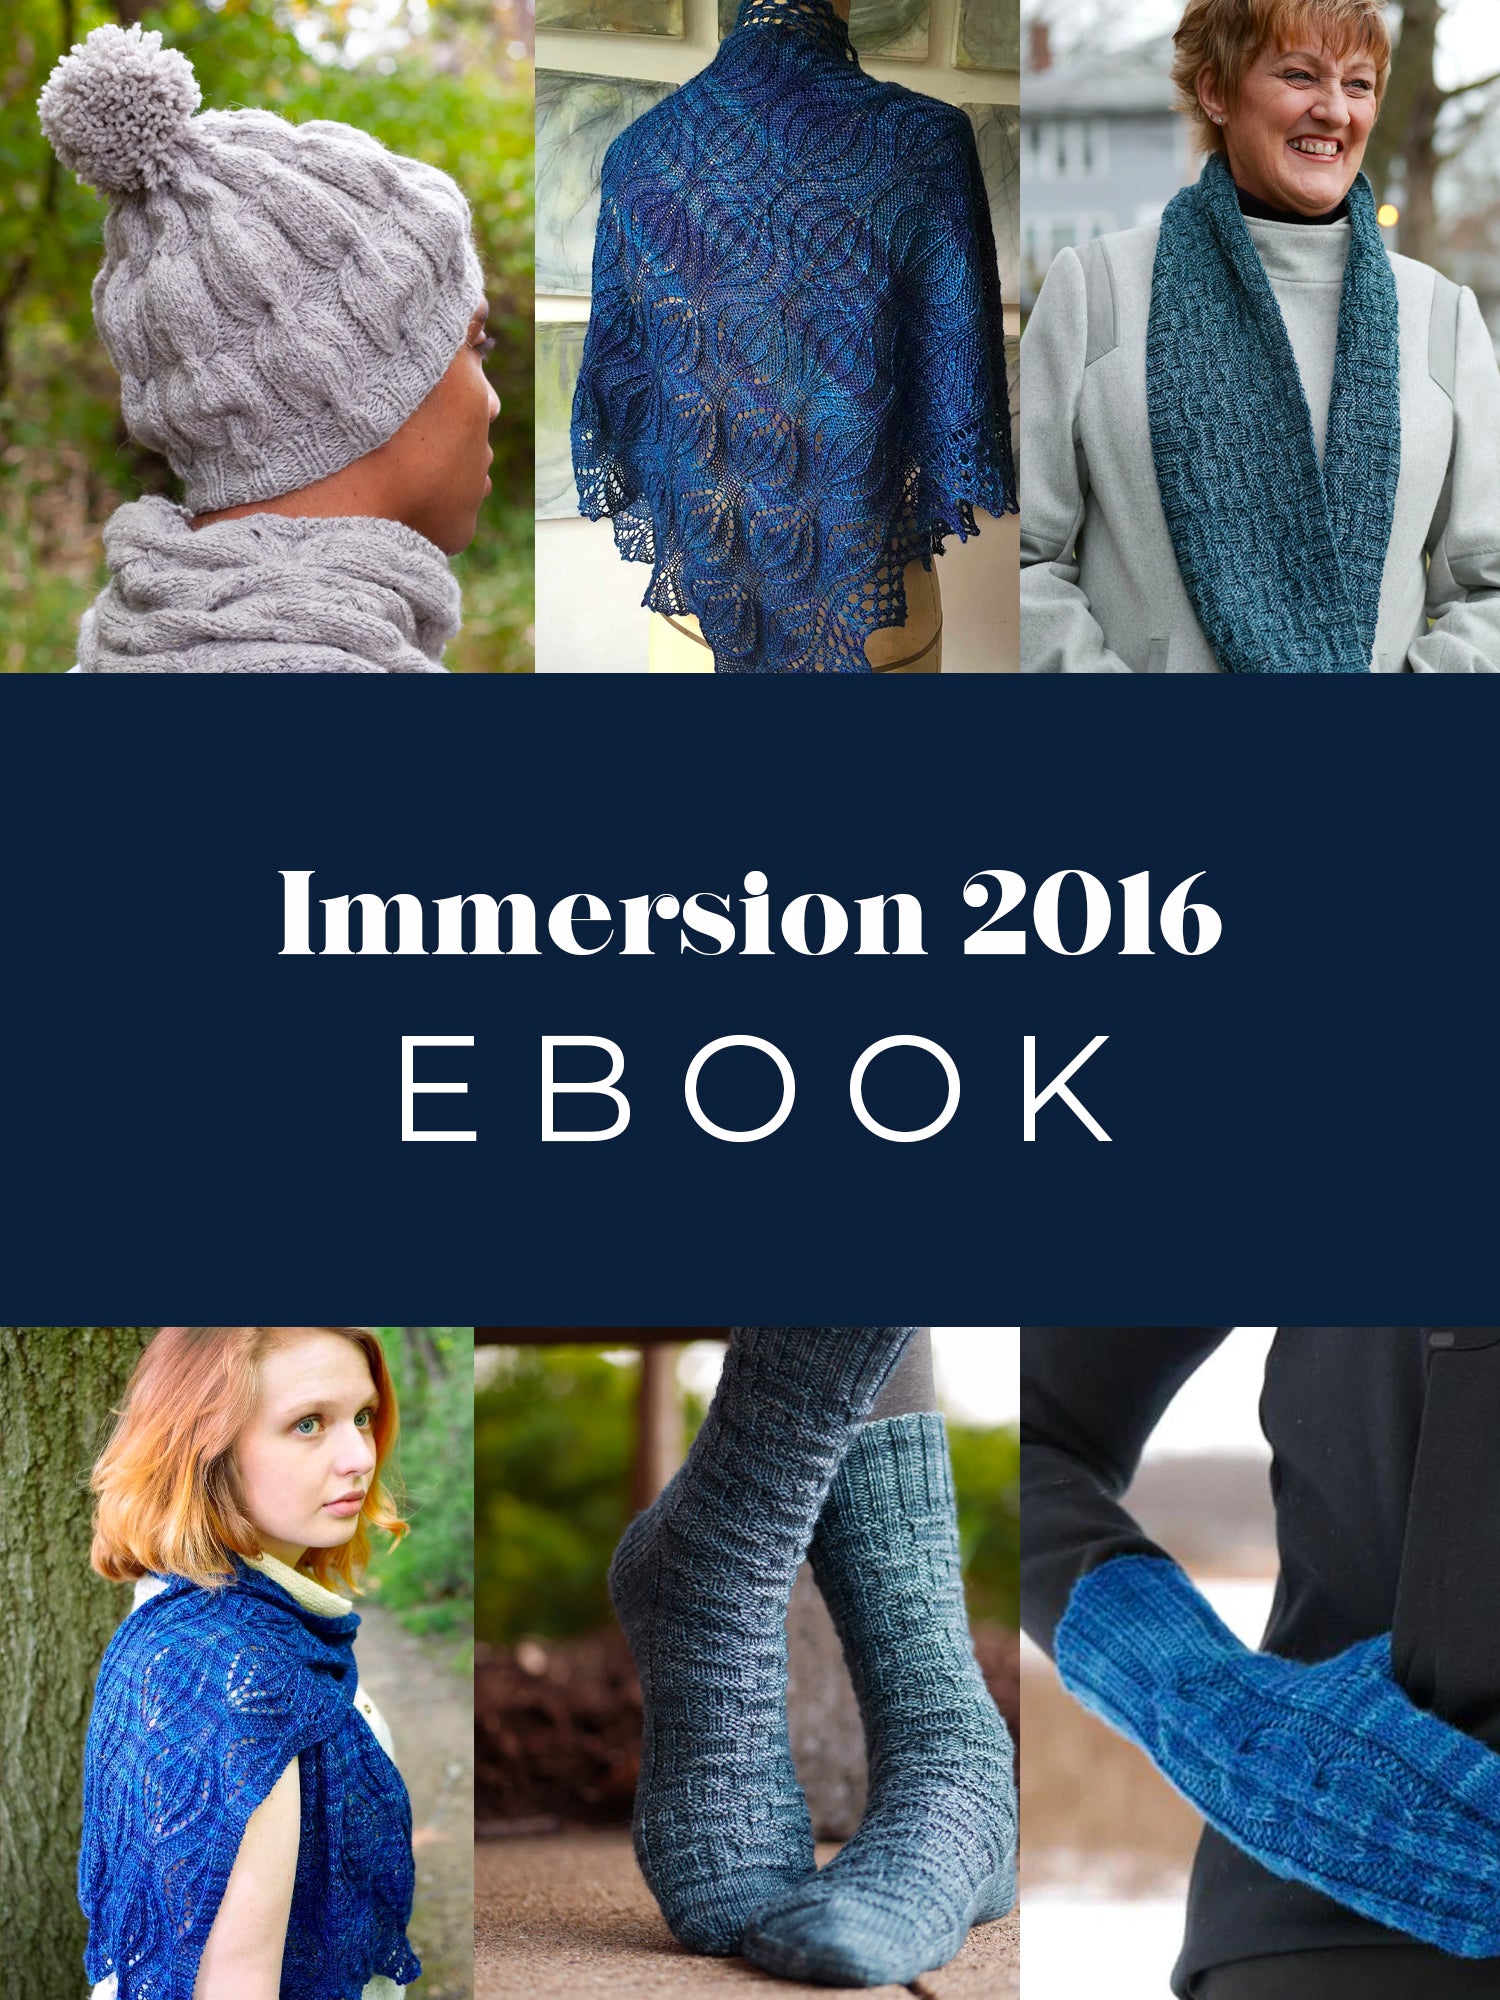 Immersion 2016 eBook